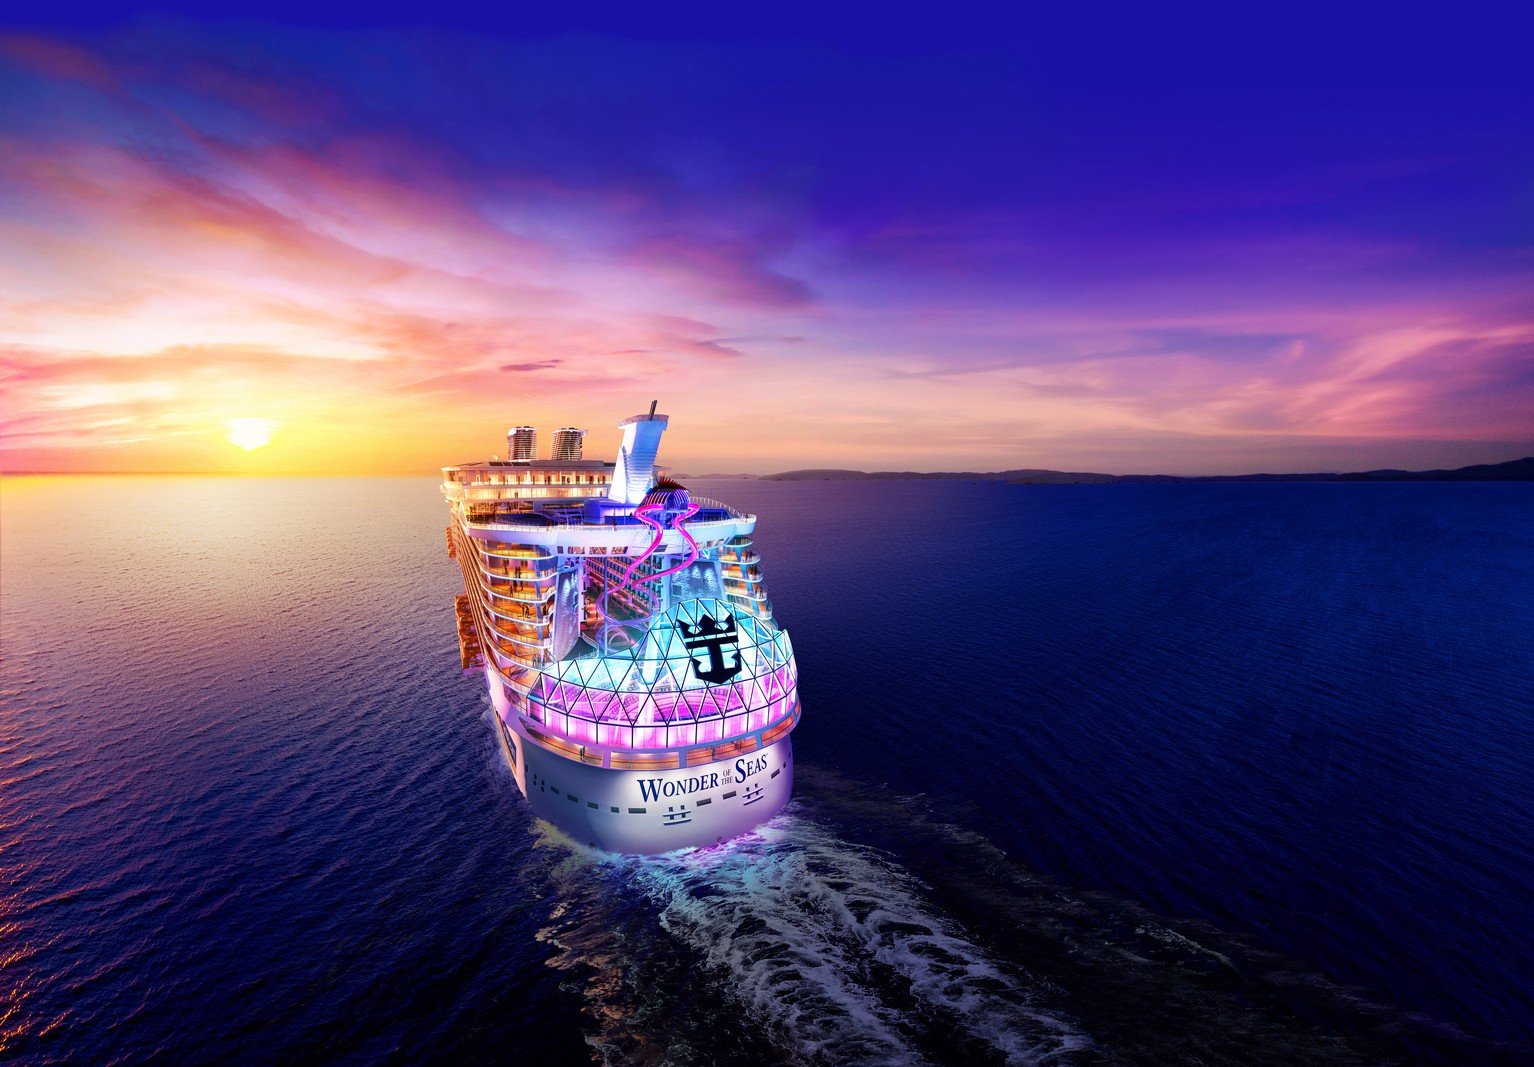 Royal Caribbean’s Wonder of the Seas Will Be the World’s Largest Cruise